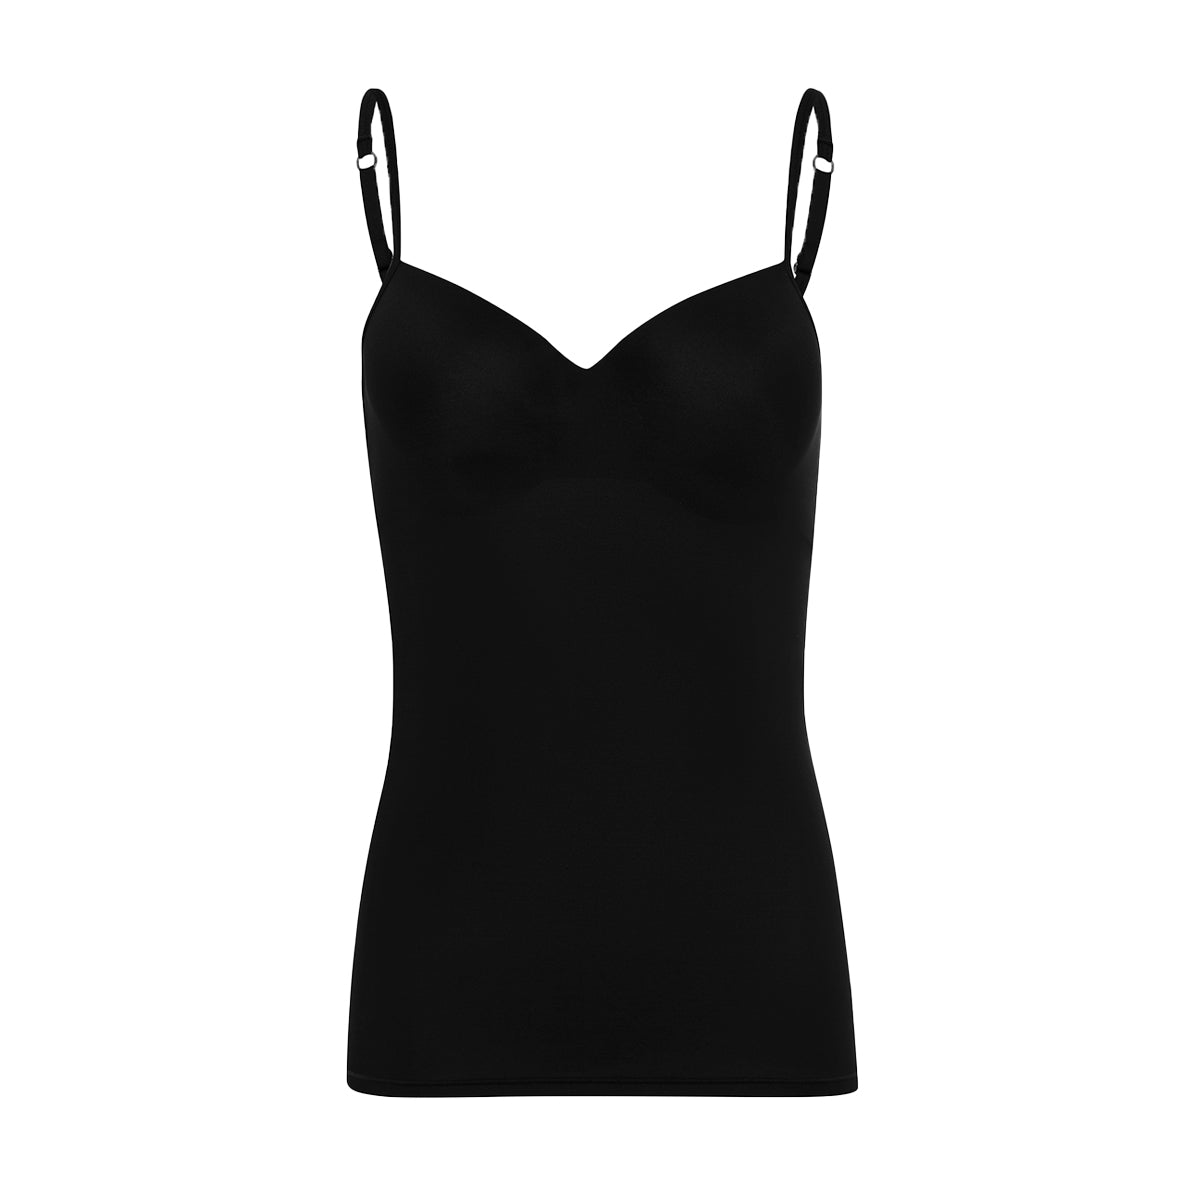 Police Auctions Canada - Women's AIRism Bra Camisole Top - Size M (517189L)